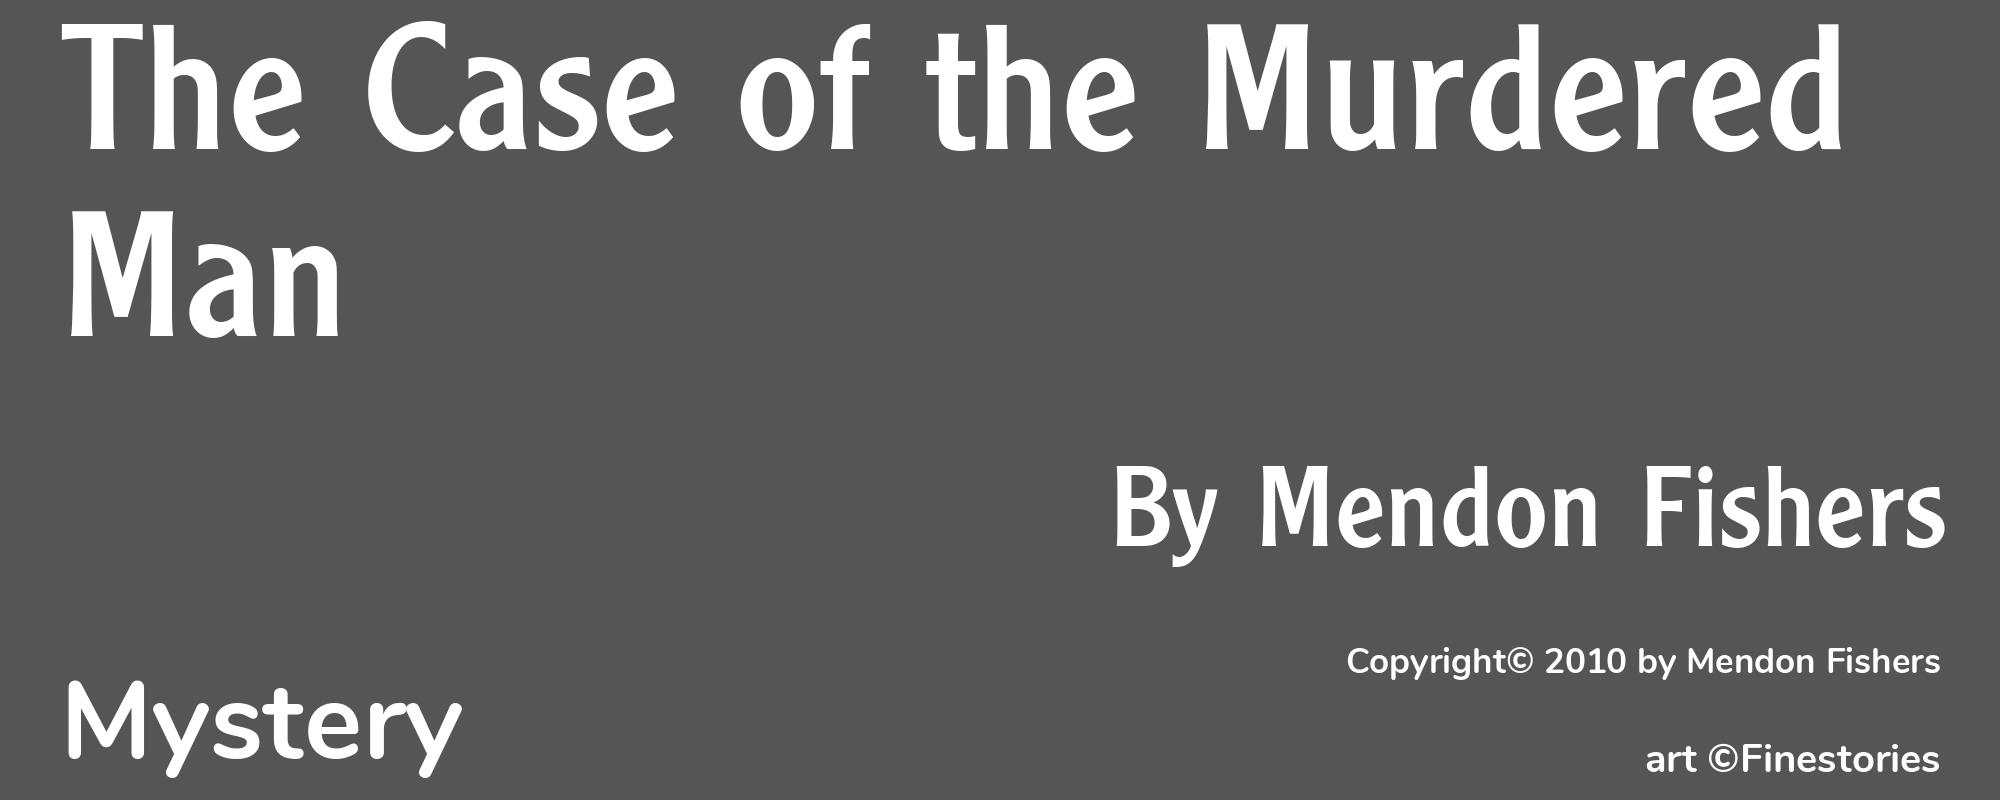 The Case of the Murdered Man - Cover